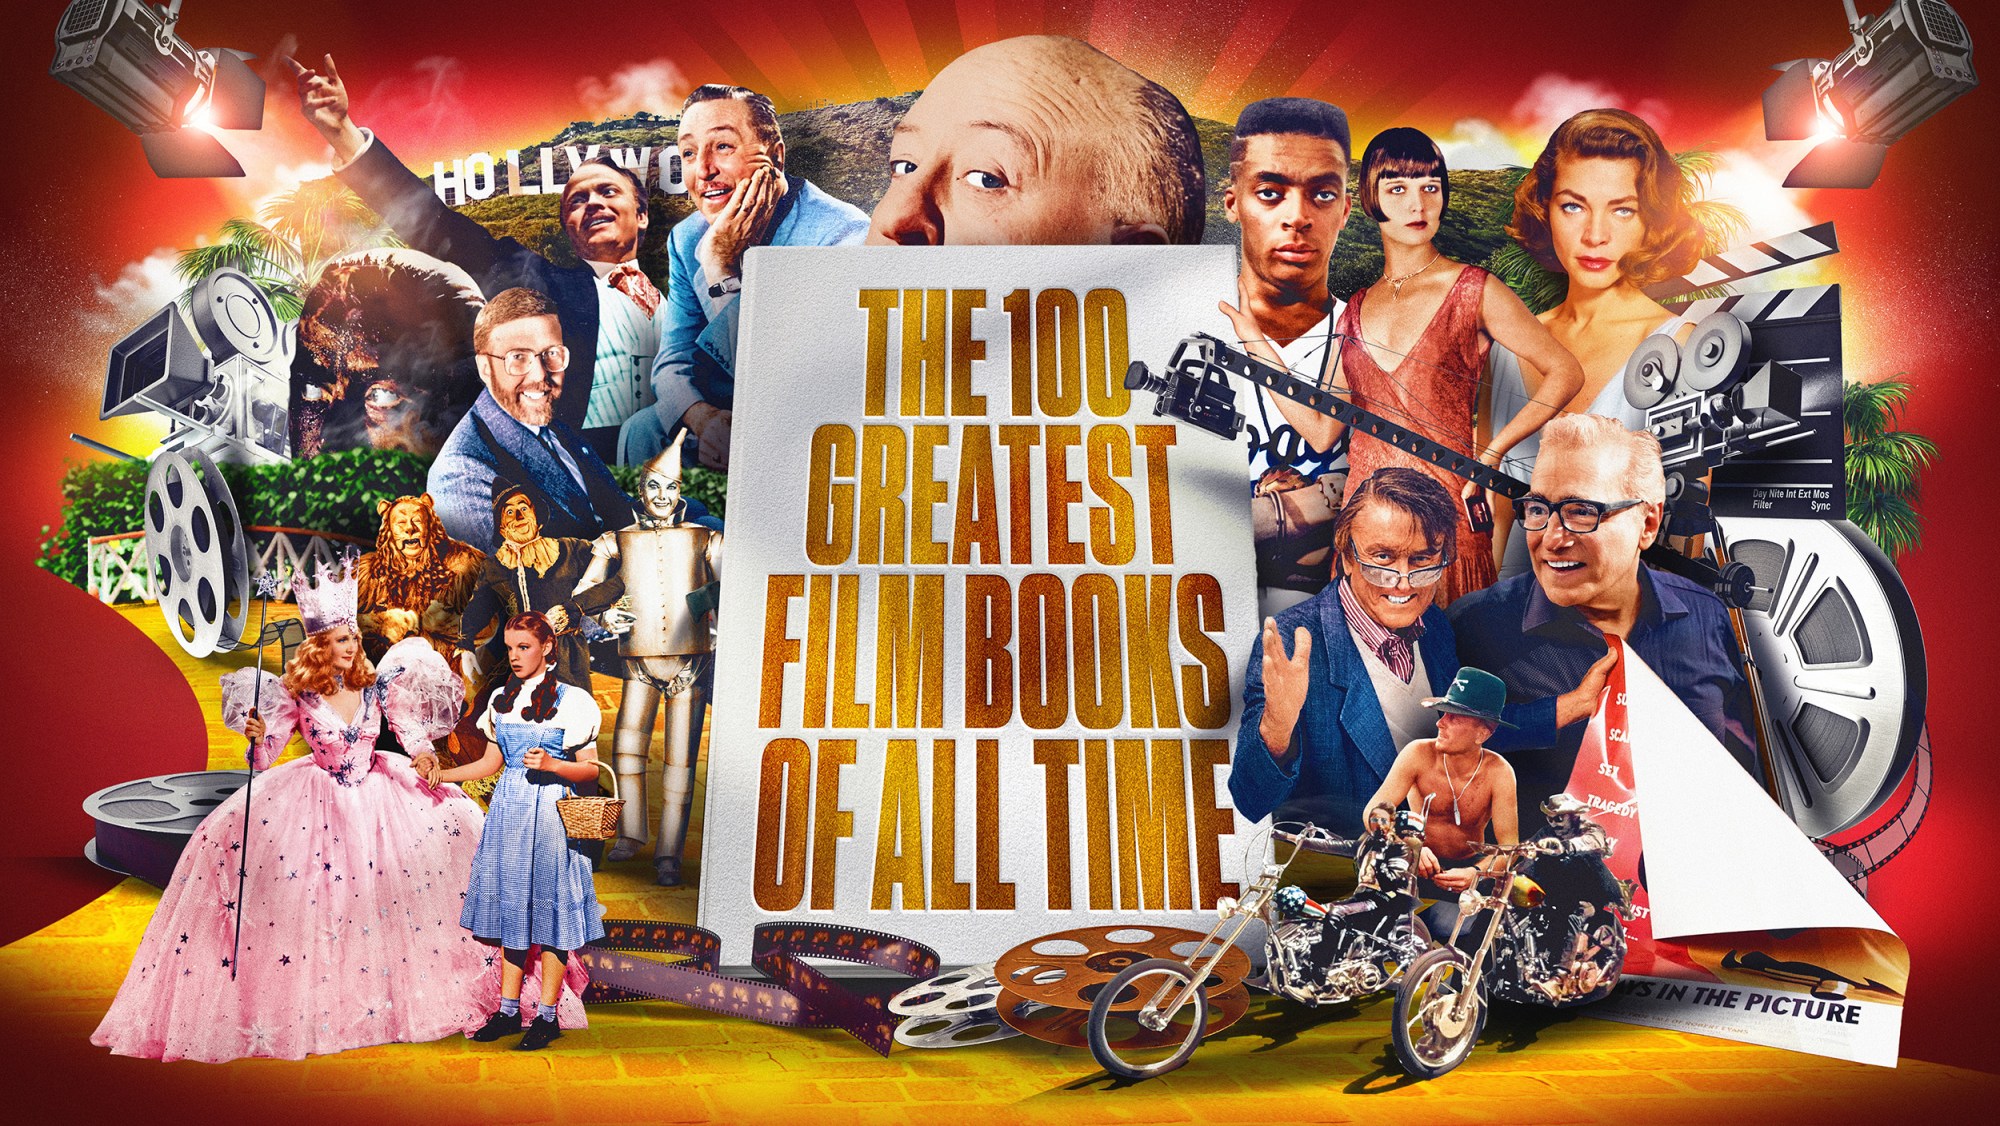 The 100 Greatest Film Books of All Time